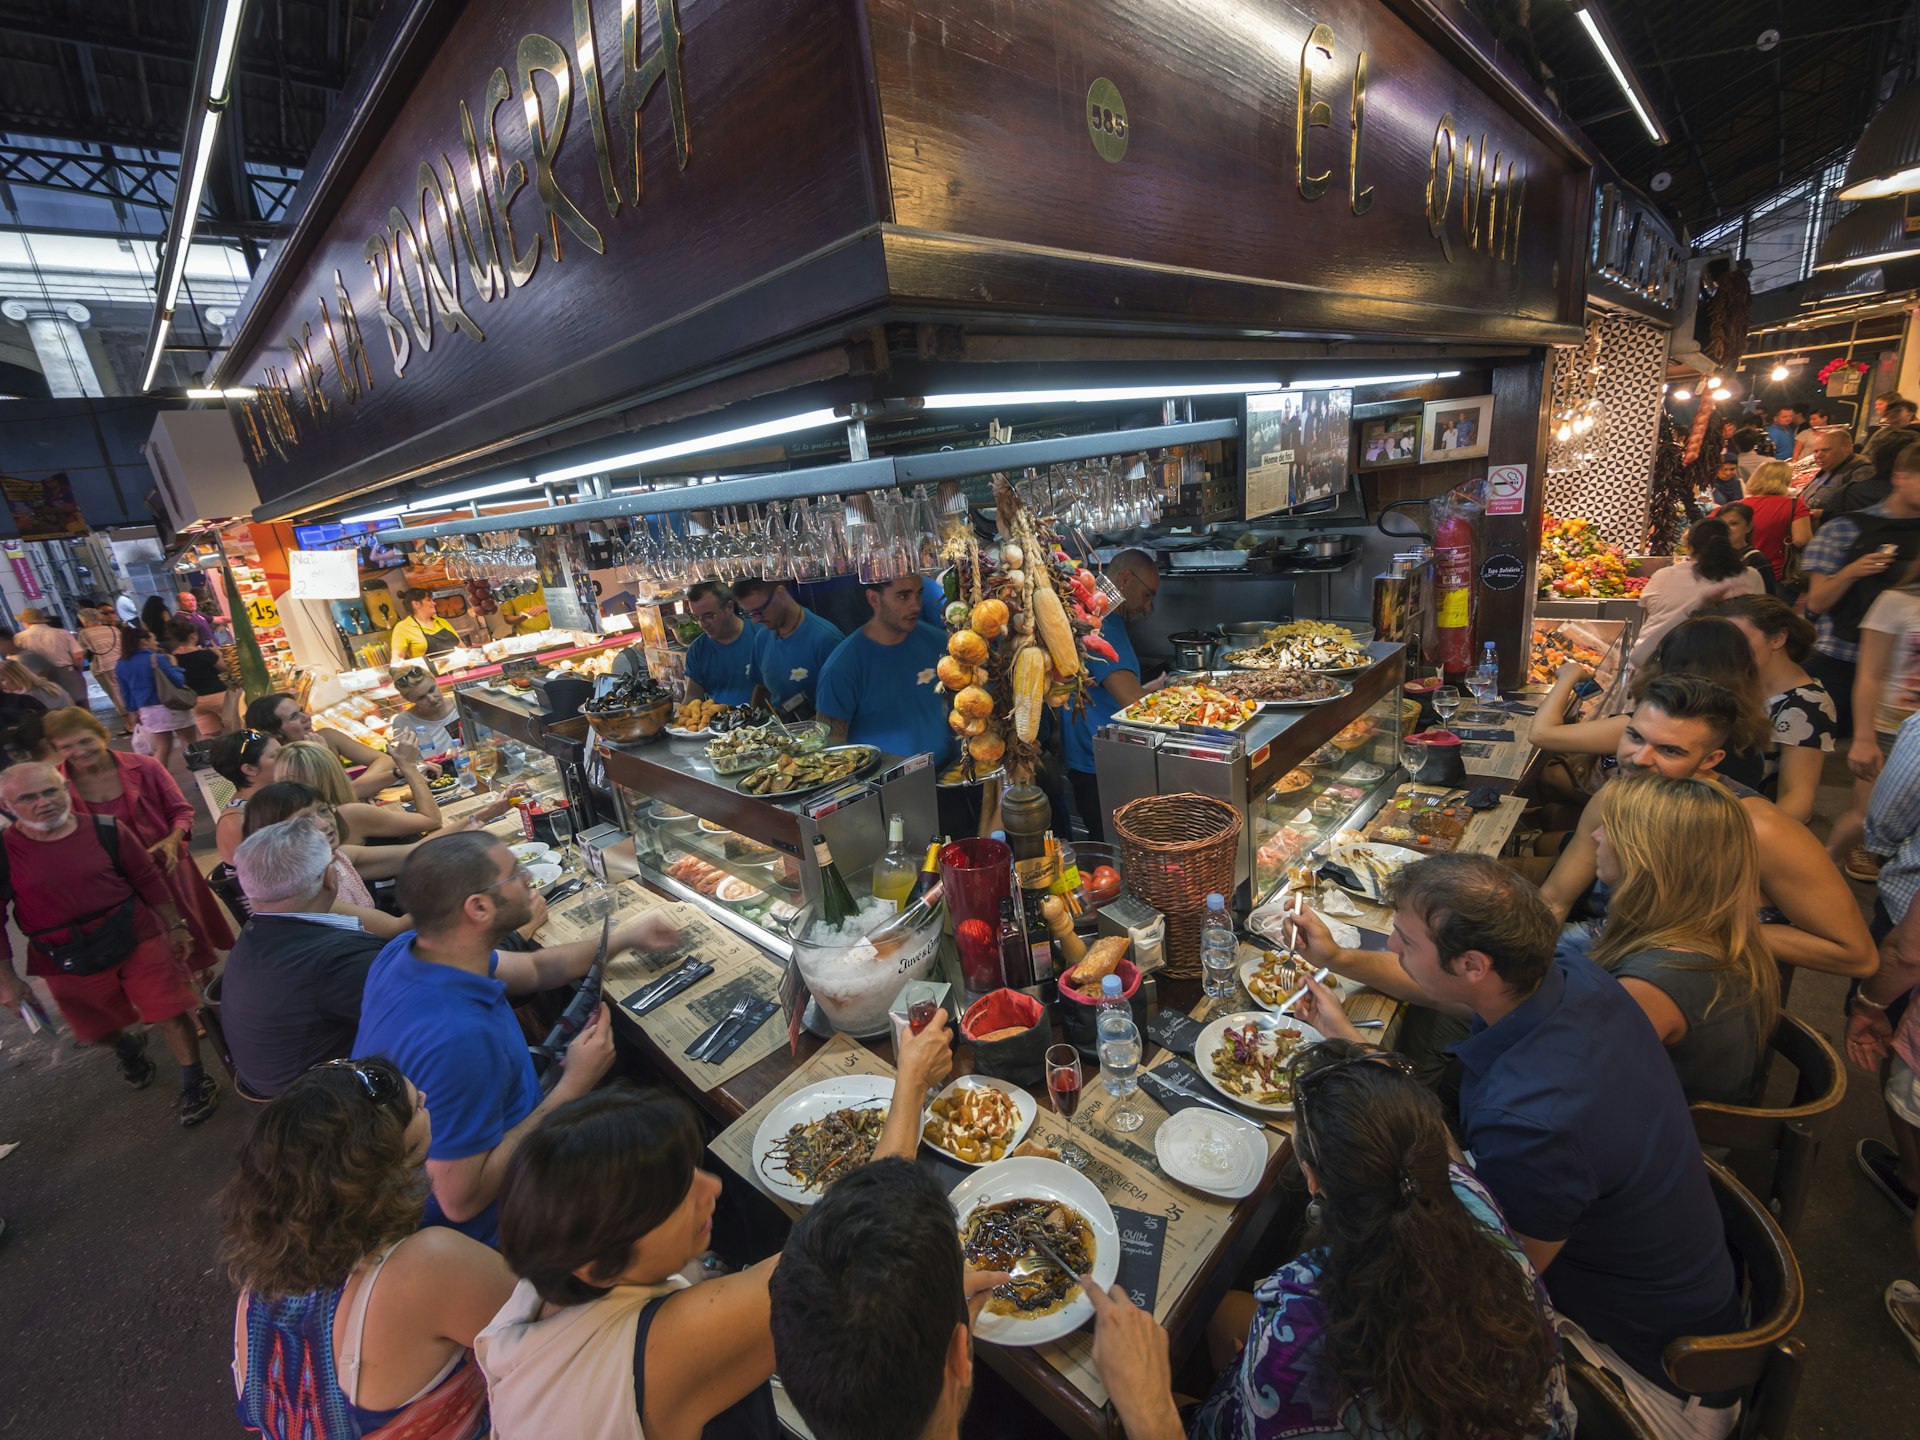 A counter lined with people eating tapas at Mercat de la Boqueria, Barcelona